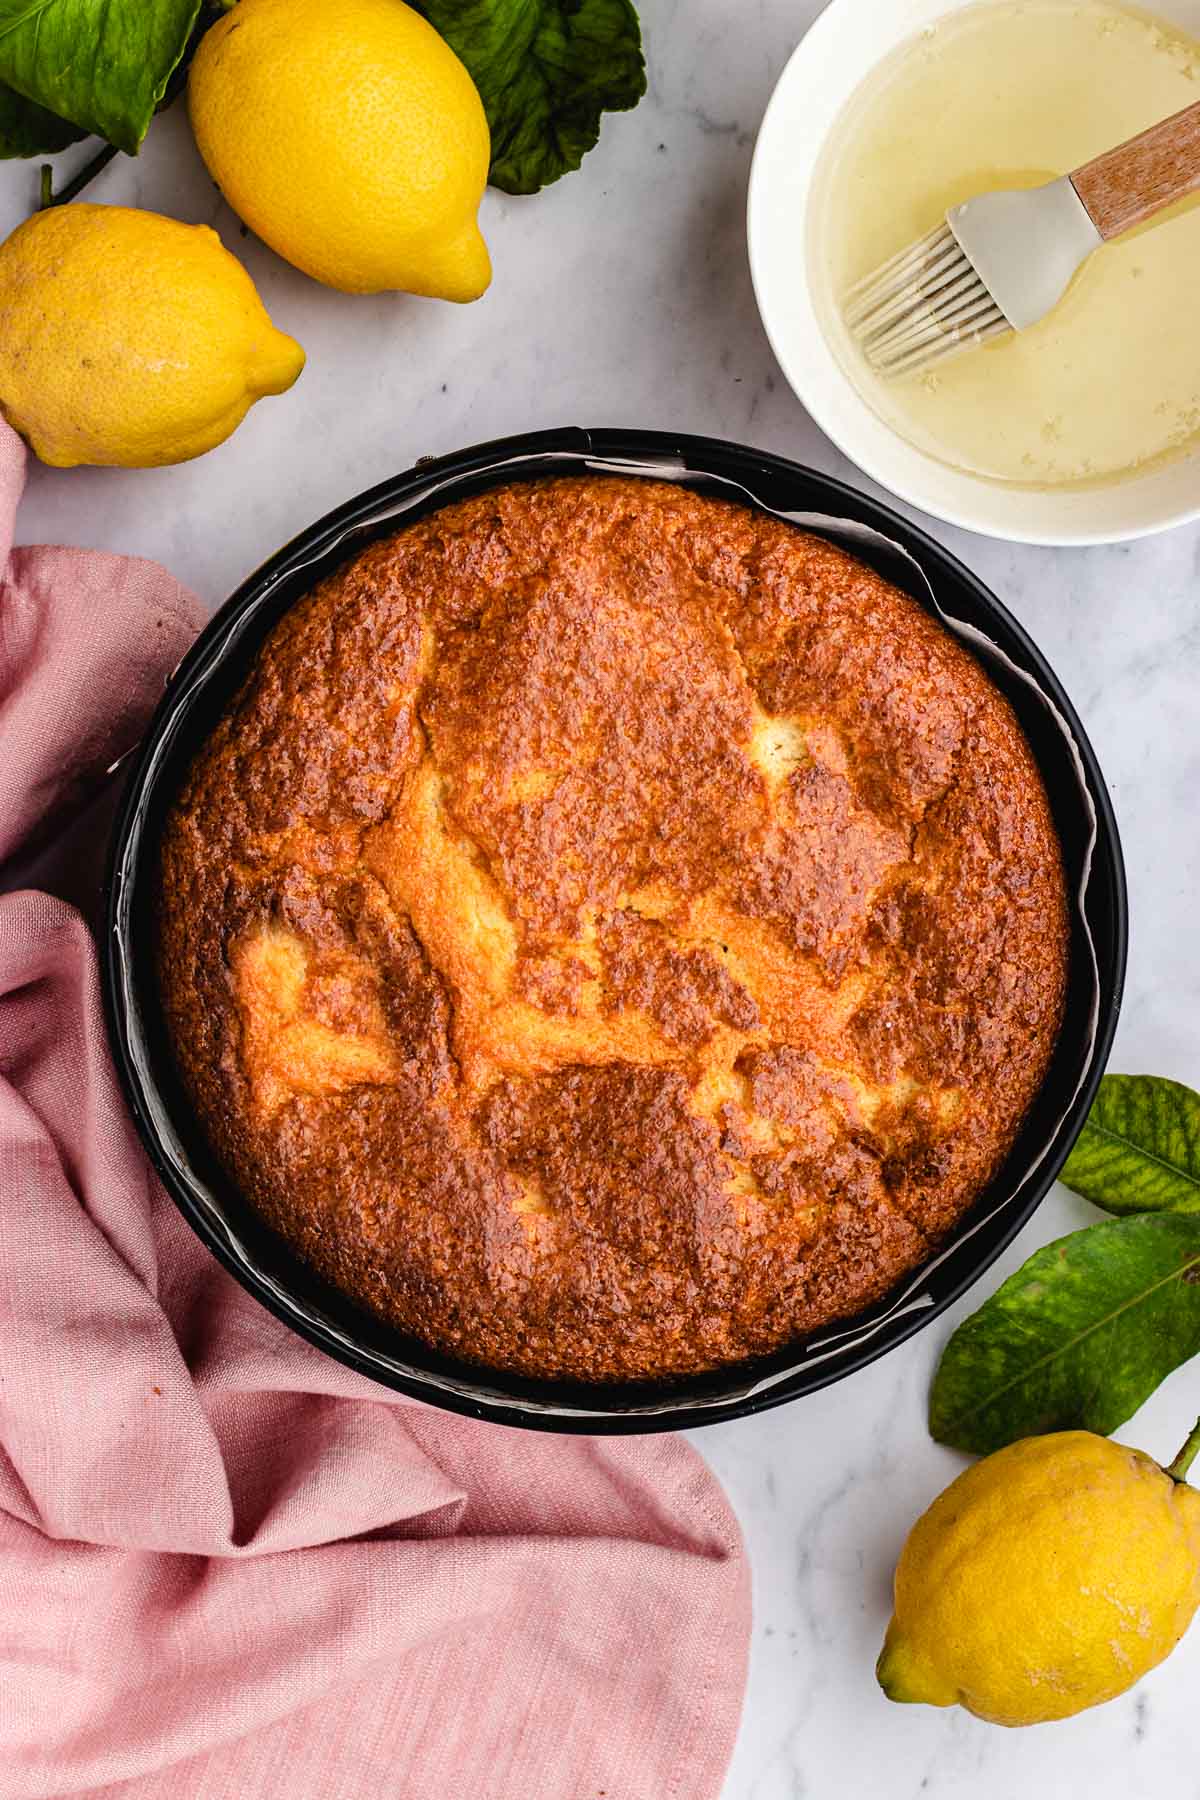 Lemon Olive Oil Cake baked in cake pan. Simple syrup with pastry brush in small bowl in top right corner. Whole lemons around cake pan.